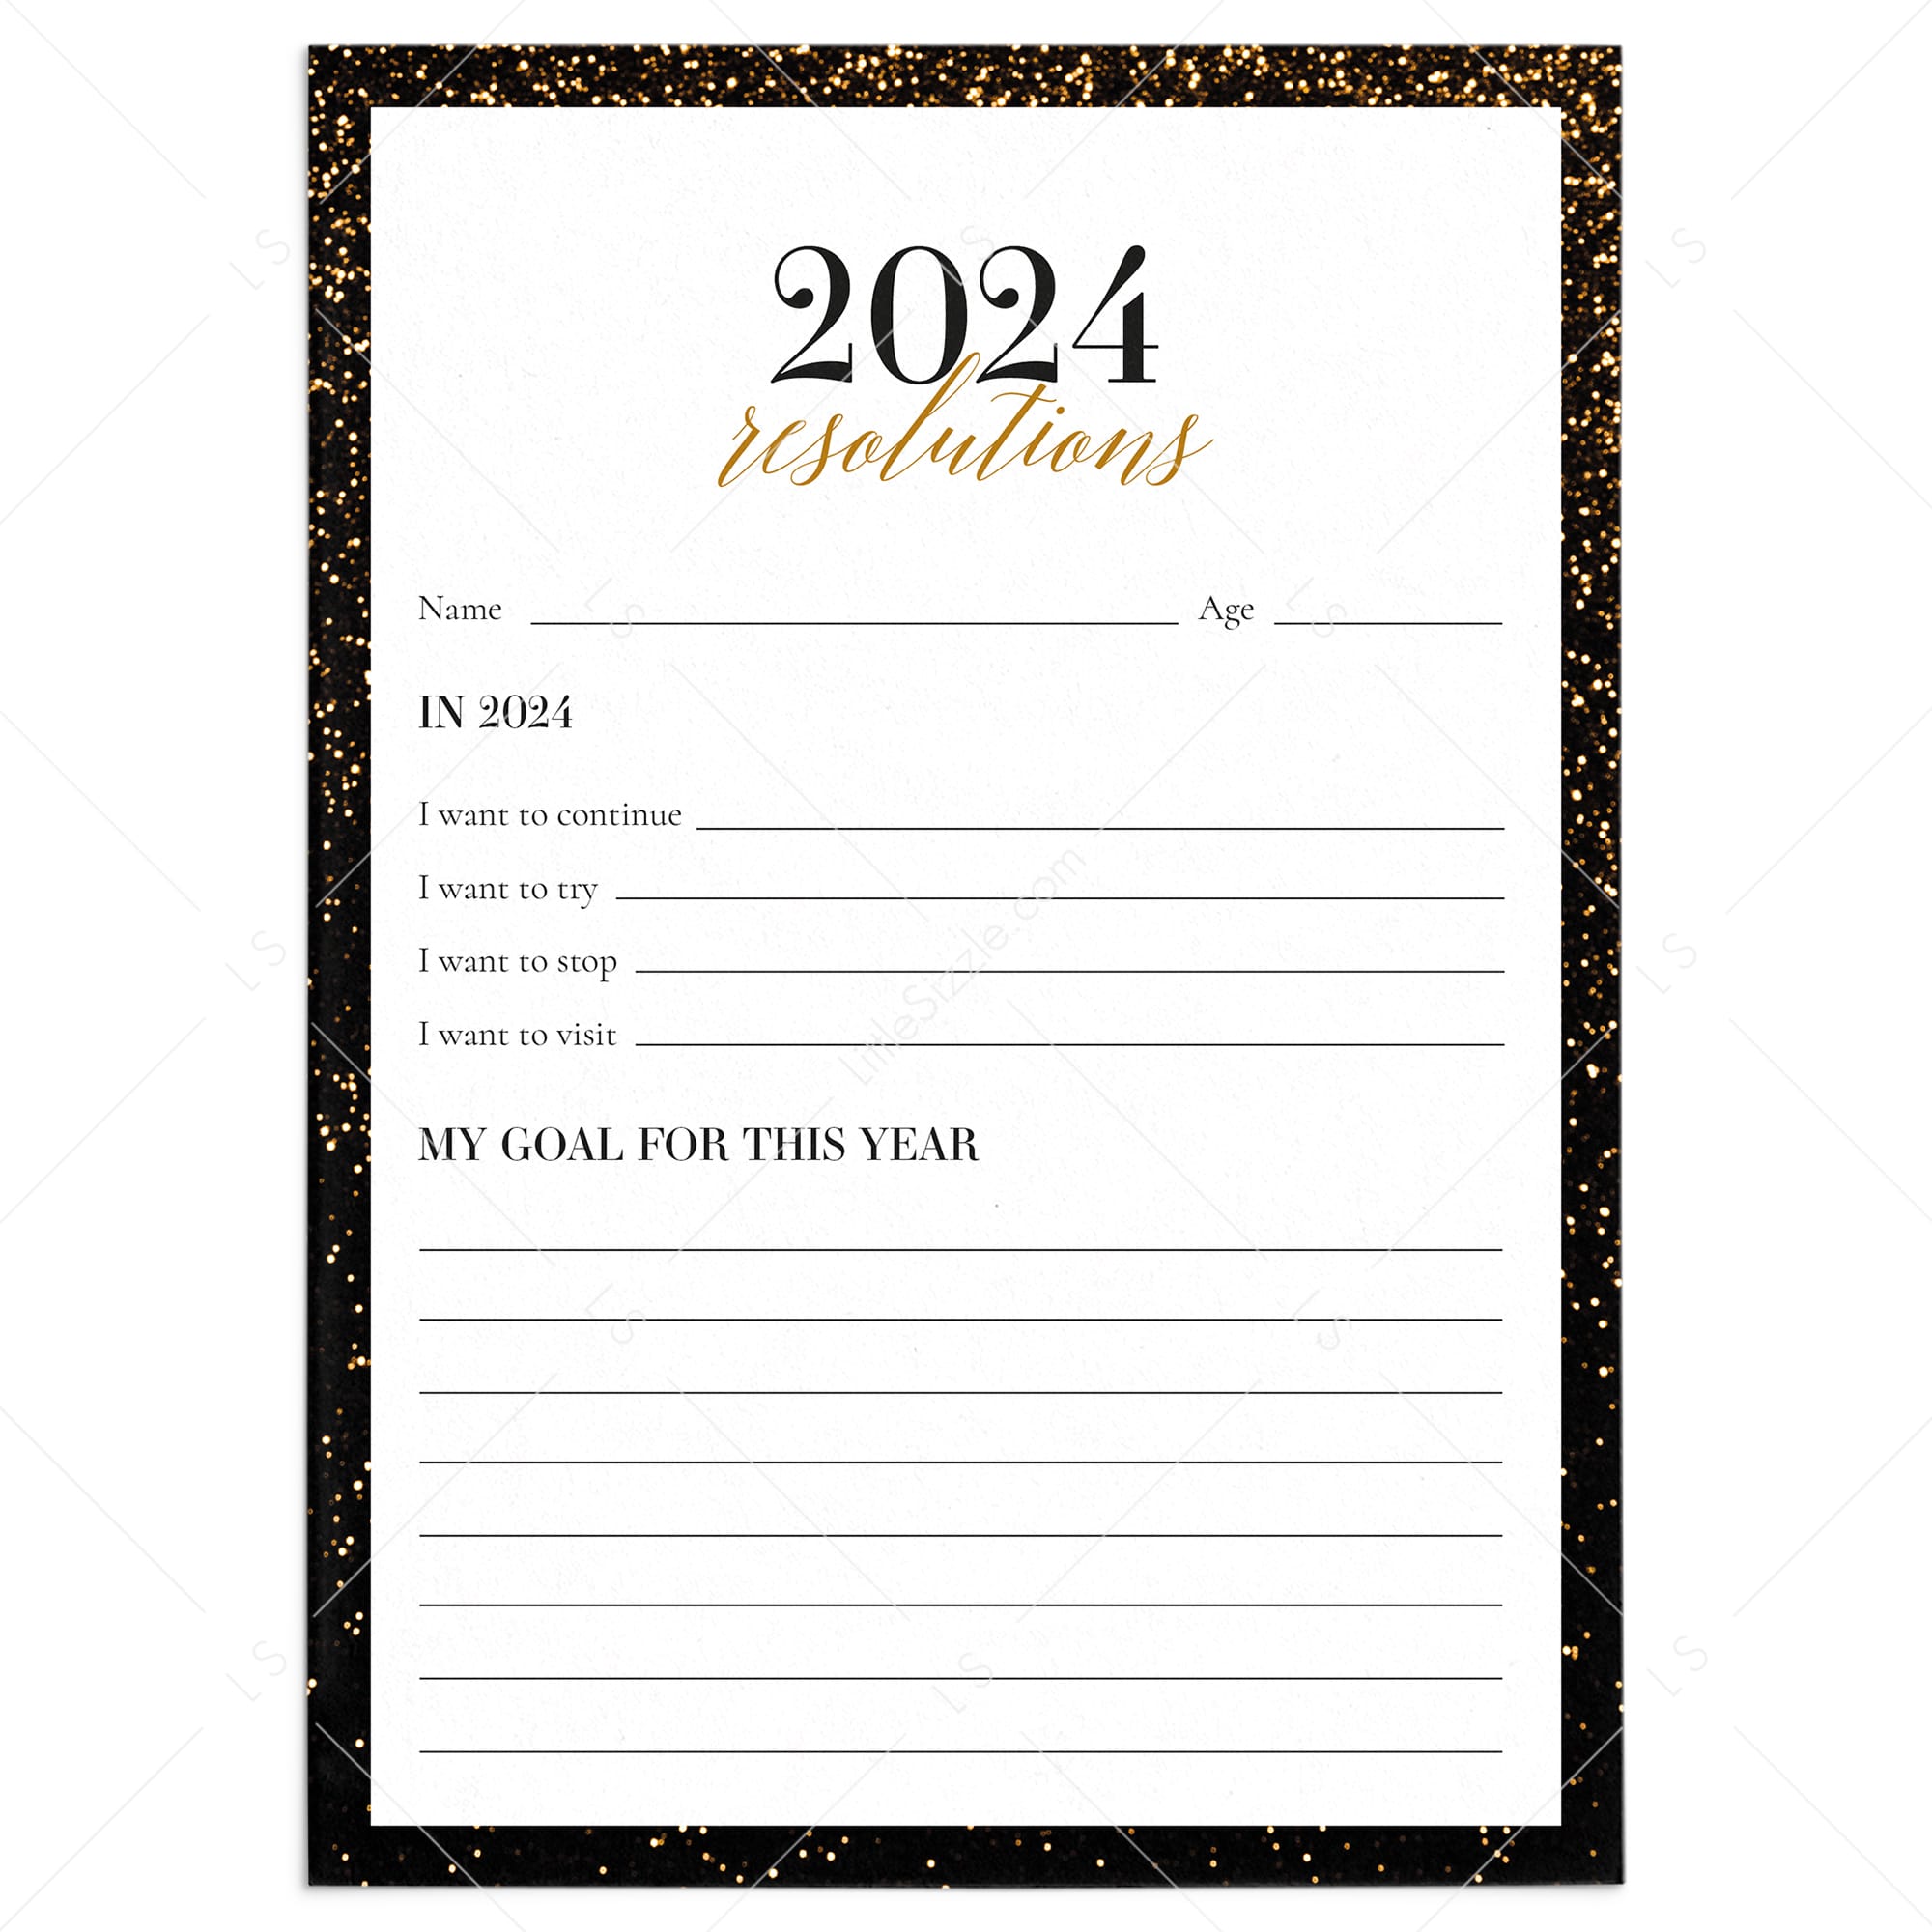 2024 Resolutions and New Year's Goals Card Printable Instant Download